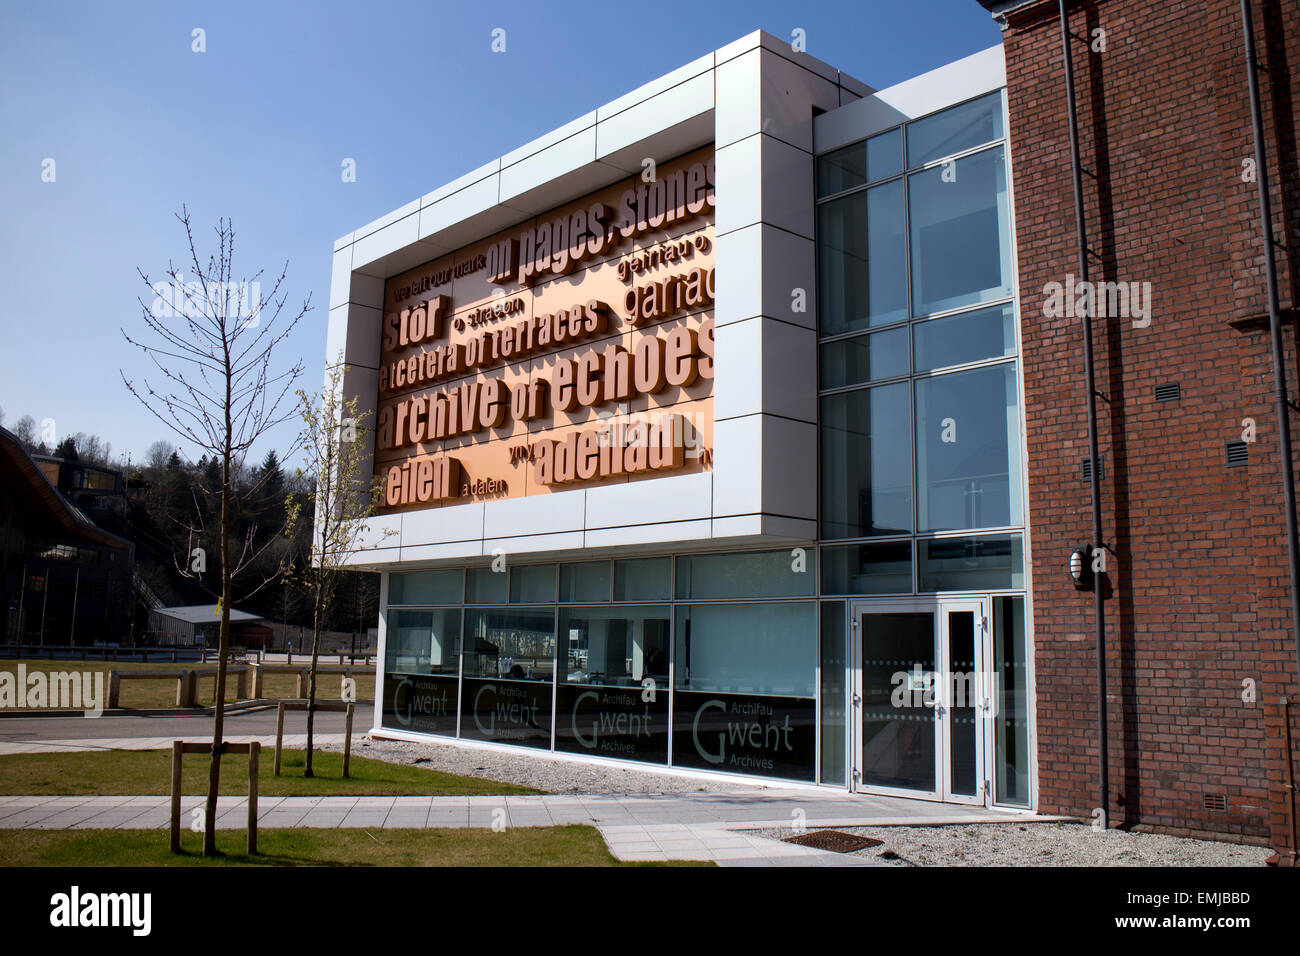 Gwent Archives and Genealogy Centre, Ebbw Vale, Blaenau Gwent, Wales, UK Stock Photo